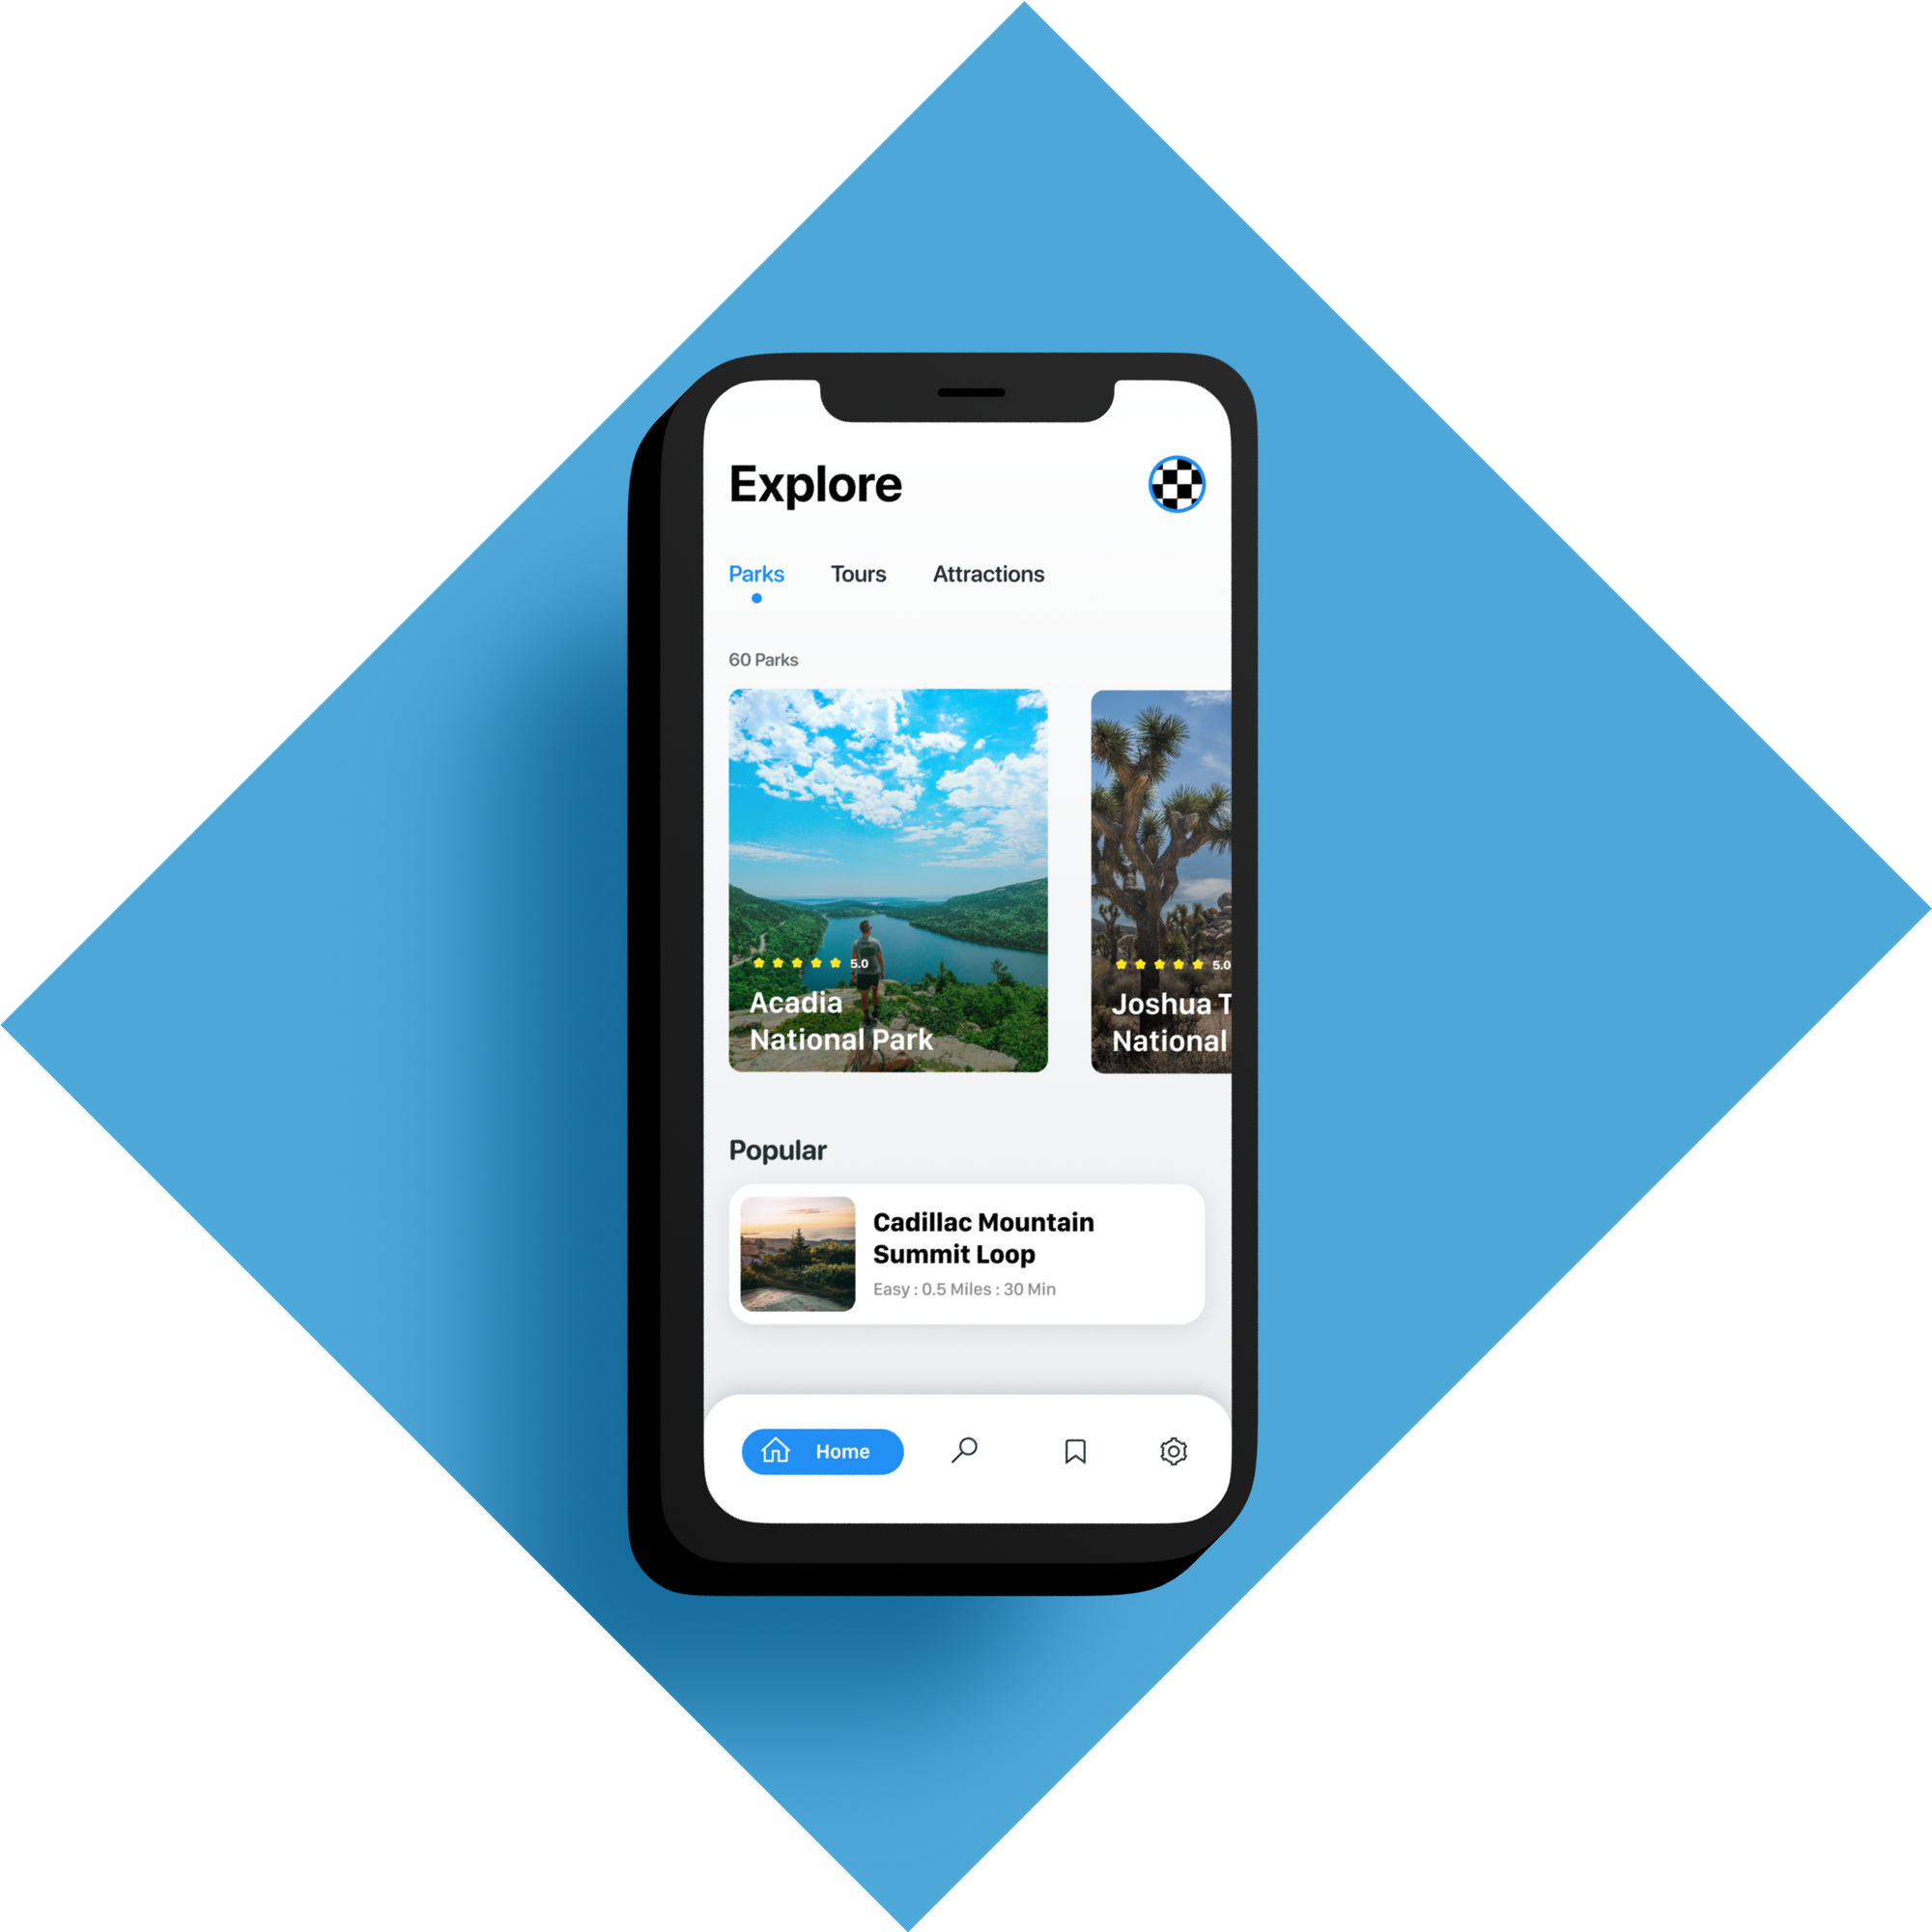 Isometric Views in SwiftUI